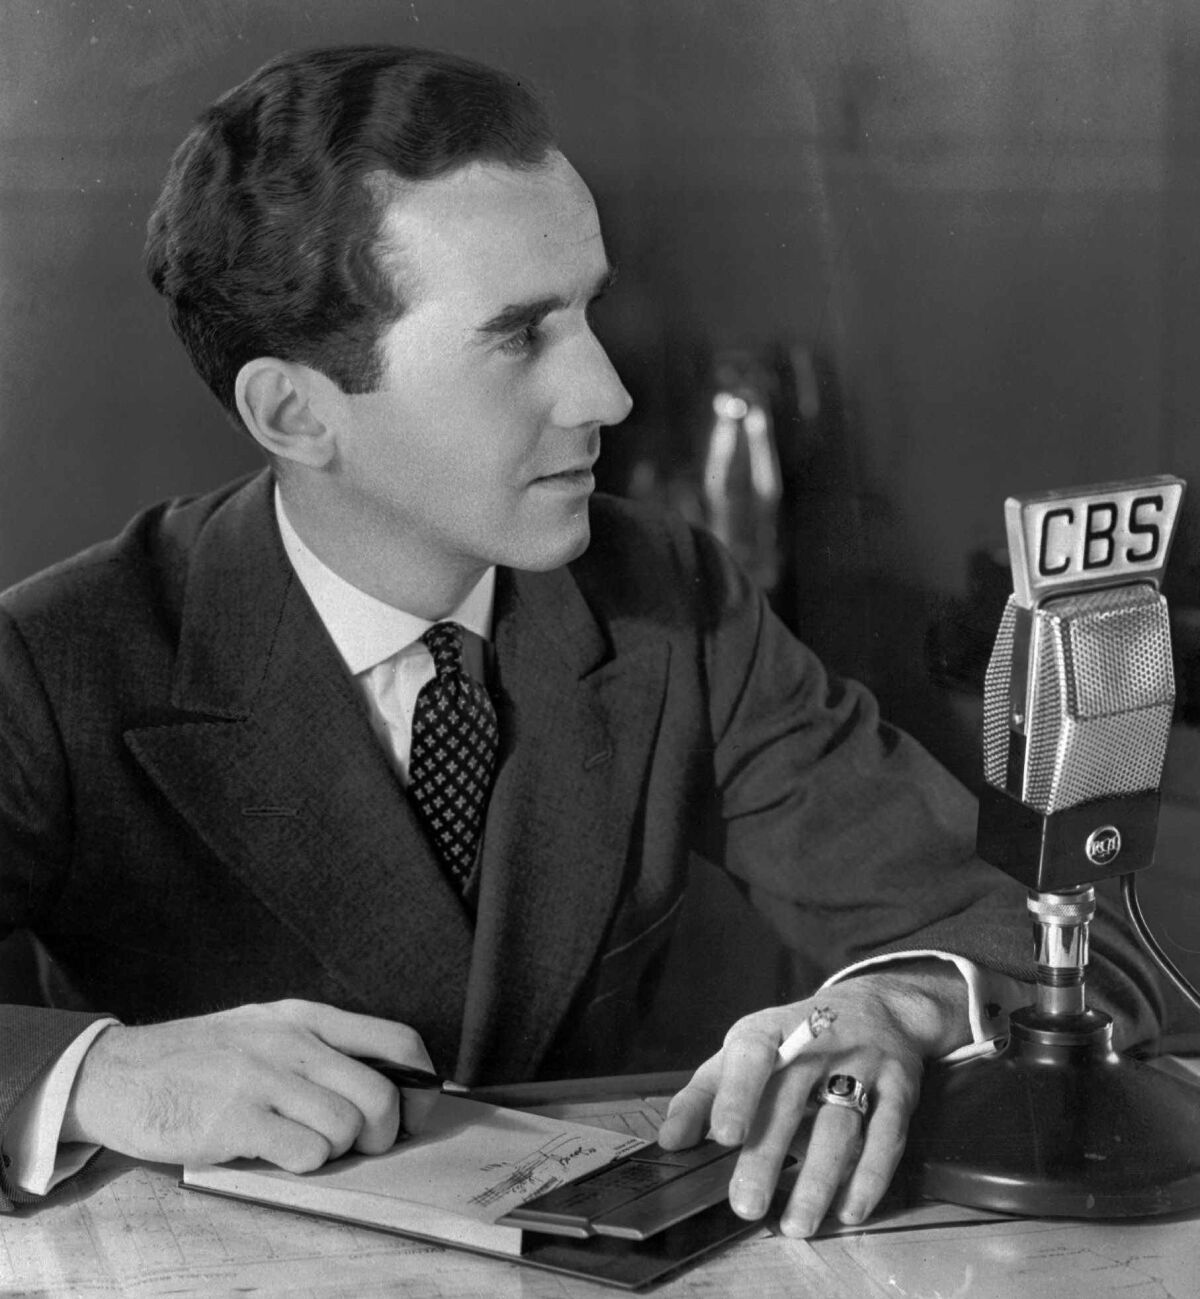 CBS newsman Edward R. Murrow is shown at work in 1939.